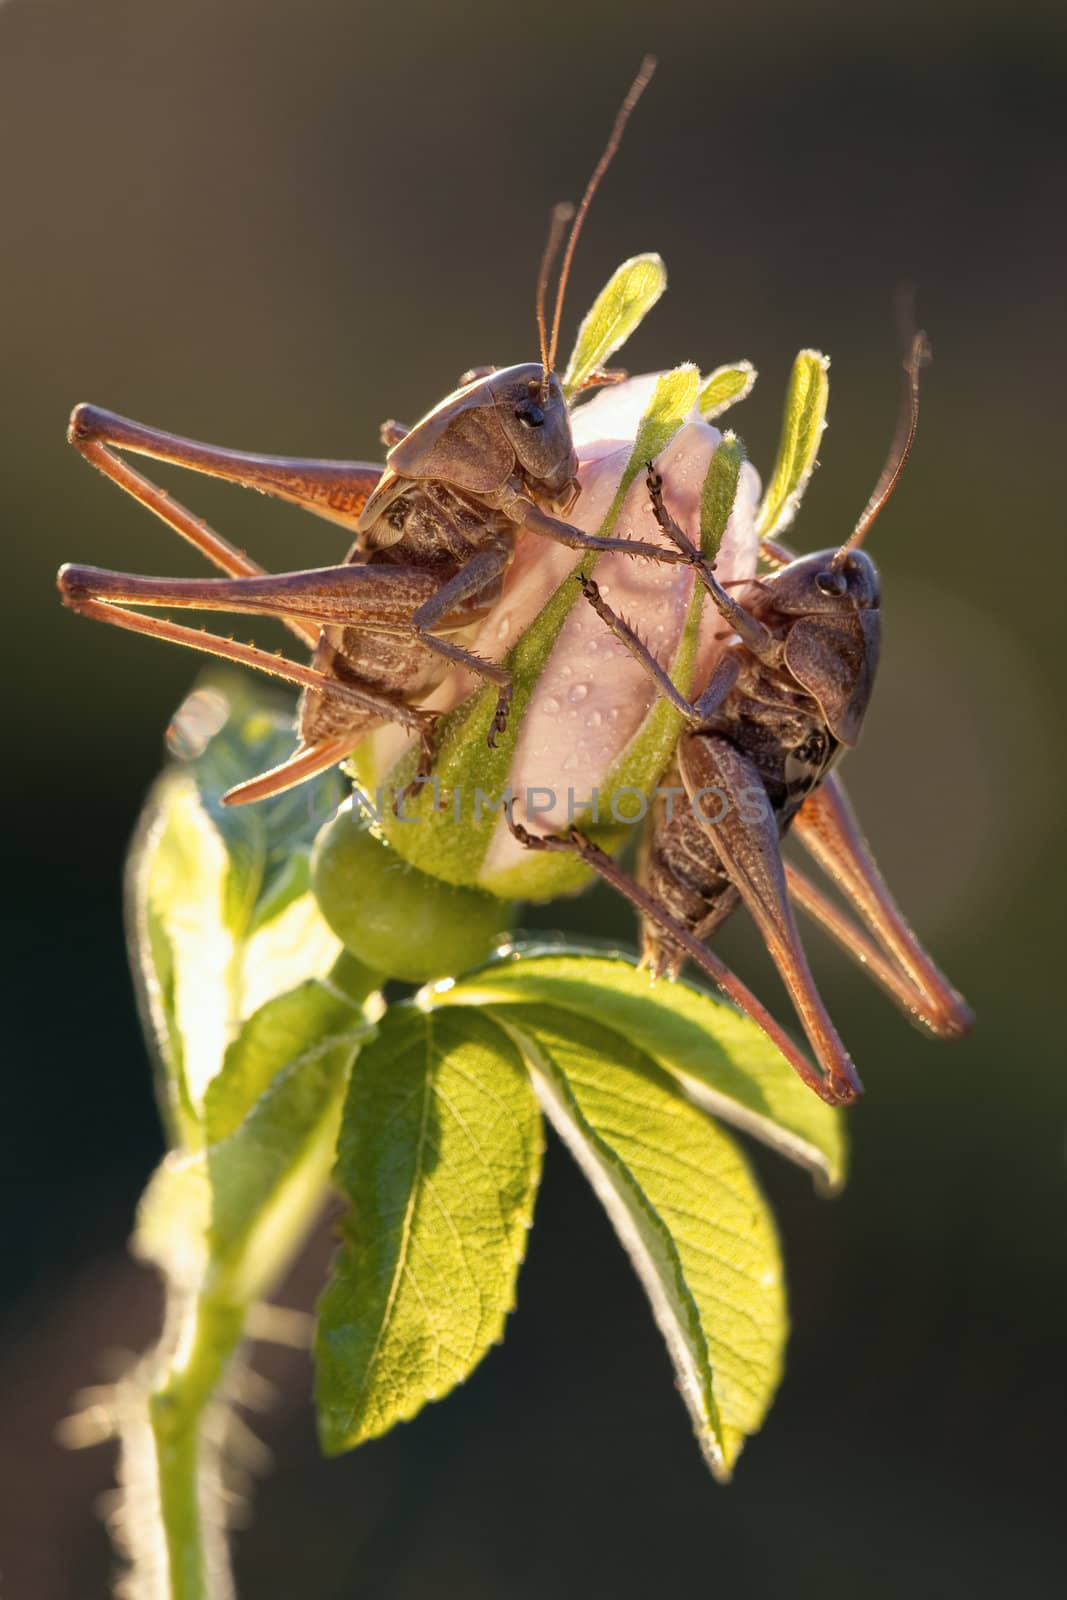 Two grasshoppers sits on the flower in evening light